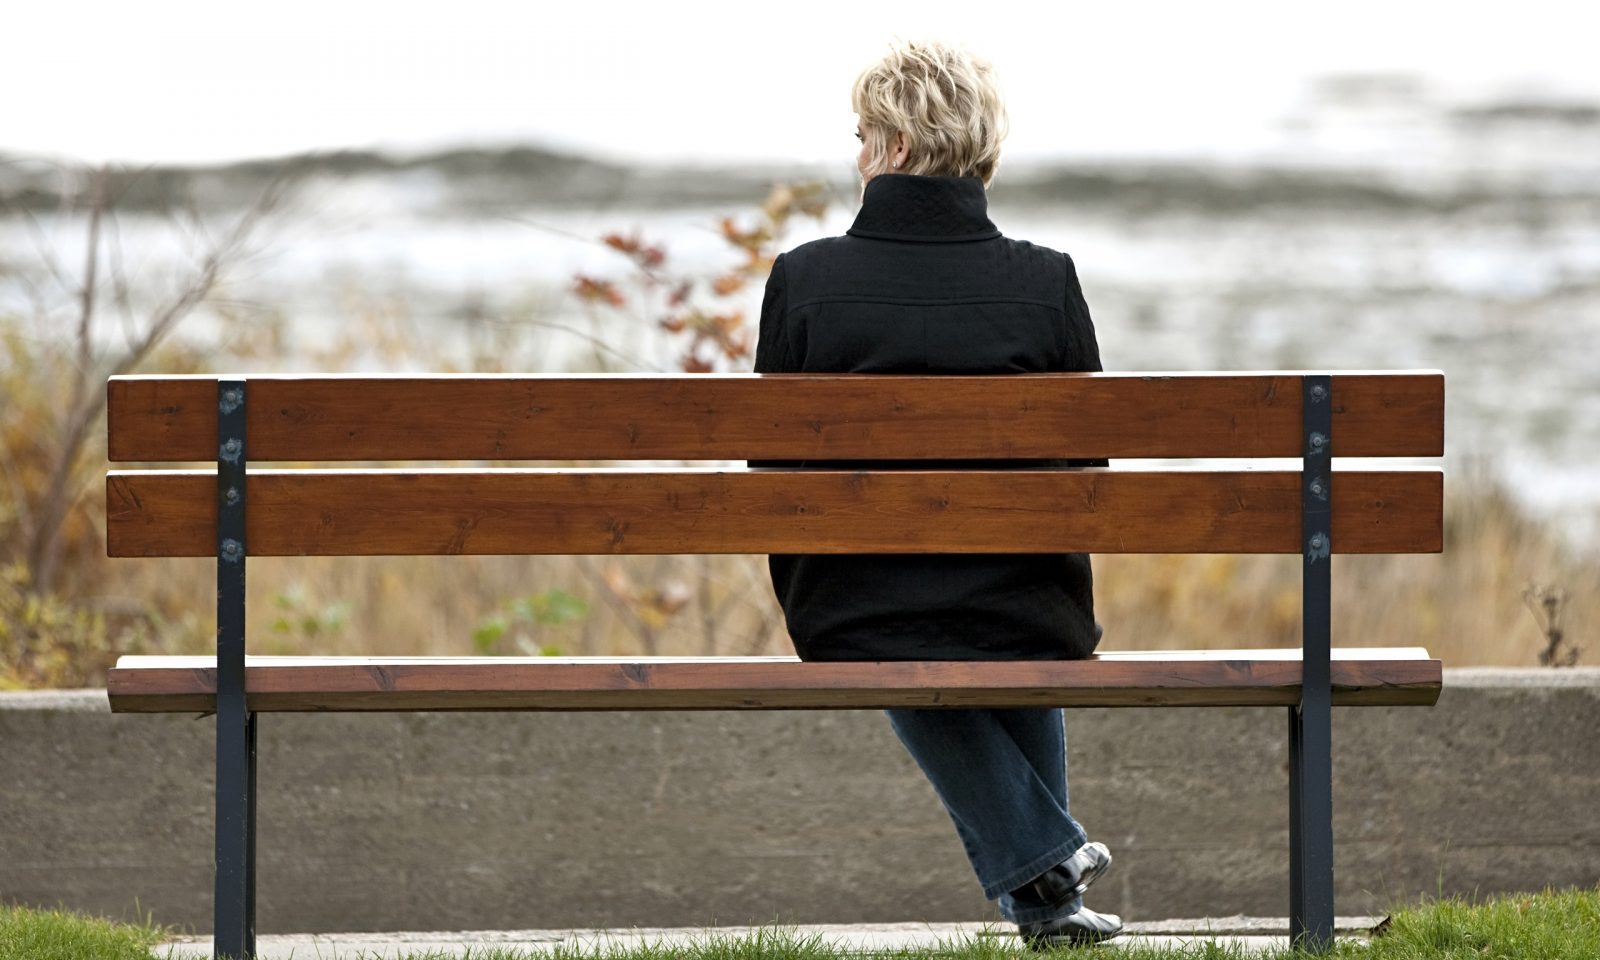 Woman sitting alone on park bench